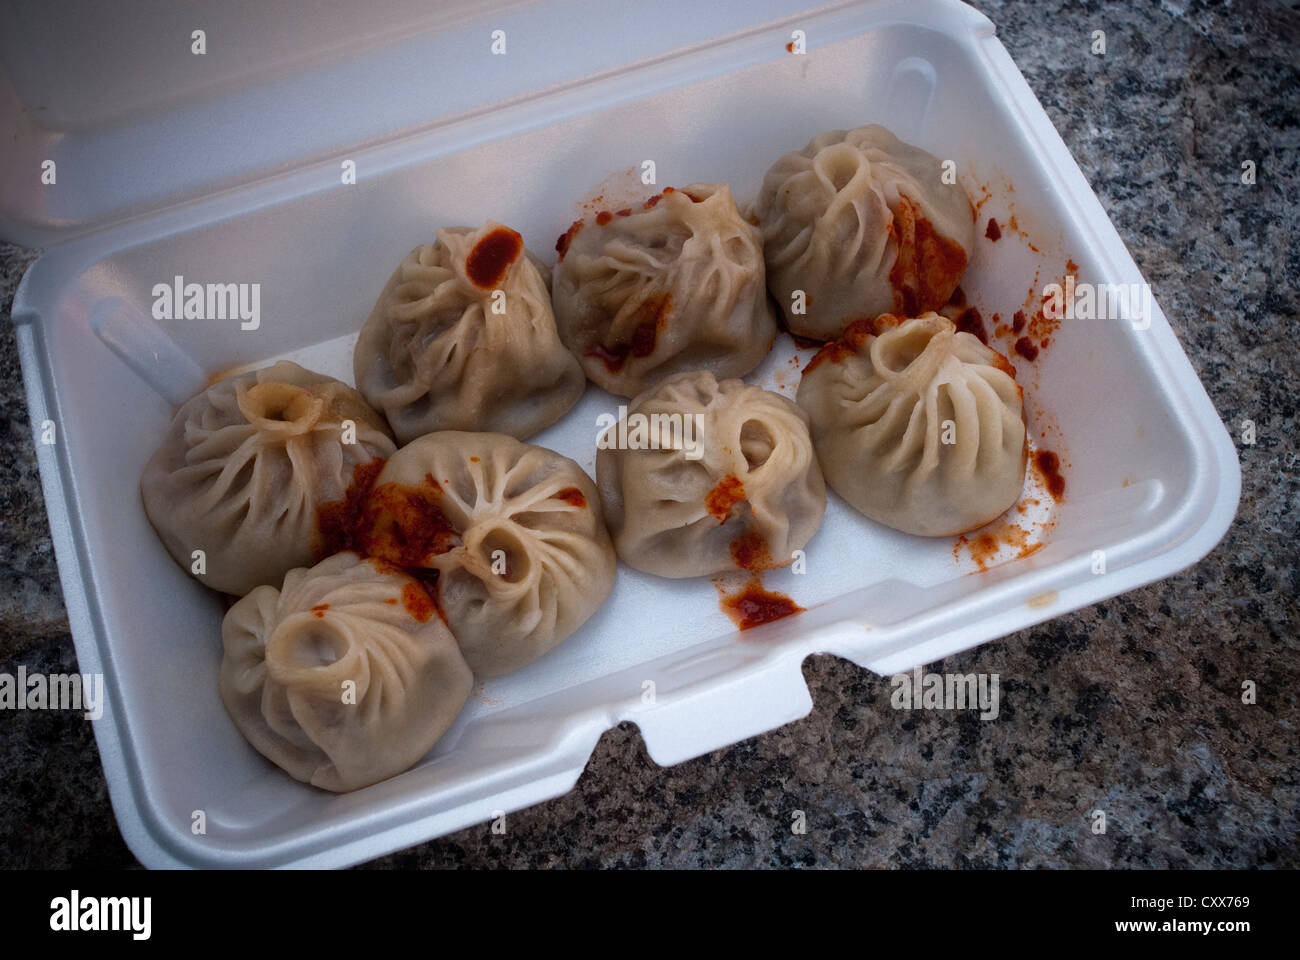 Tibetan Momo dumplings with hot sauce in a take out container in New York  on Sunday, October 14, 2012. (© Richard B. Levine Stock Photo - Alamy